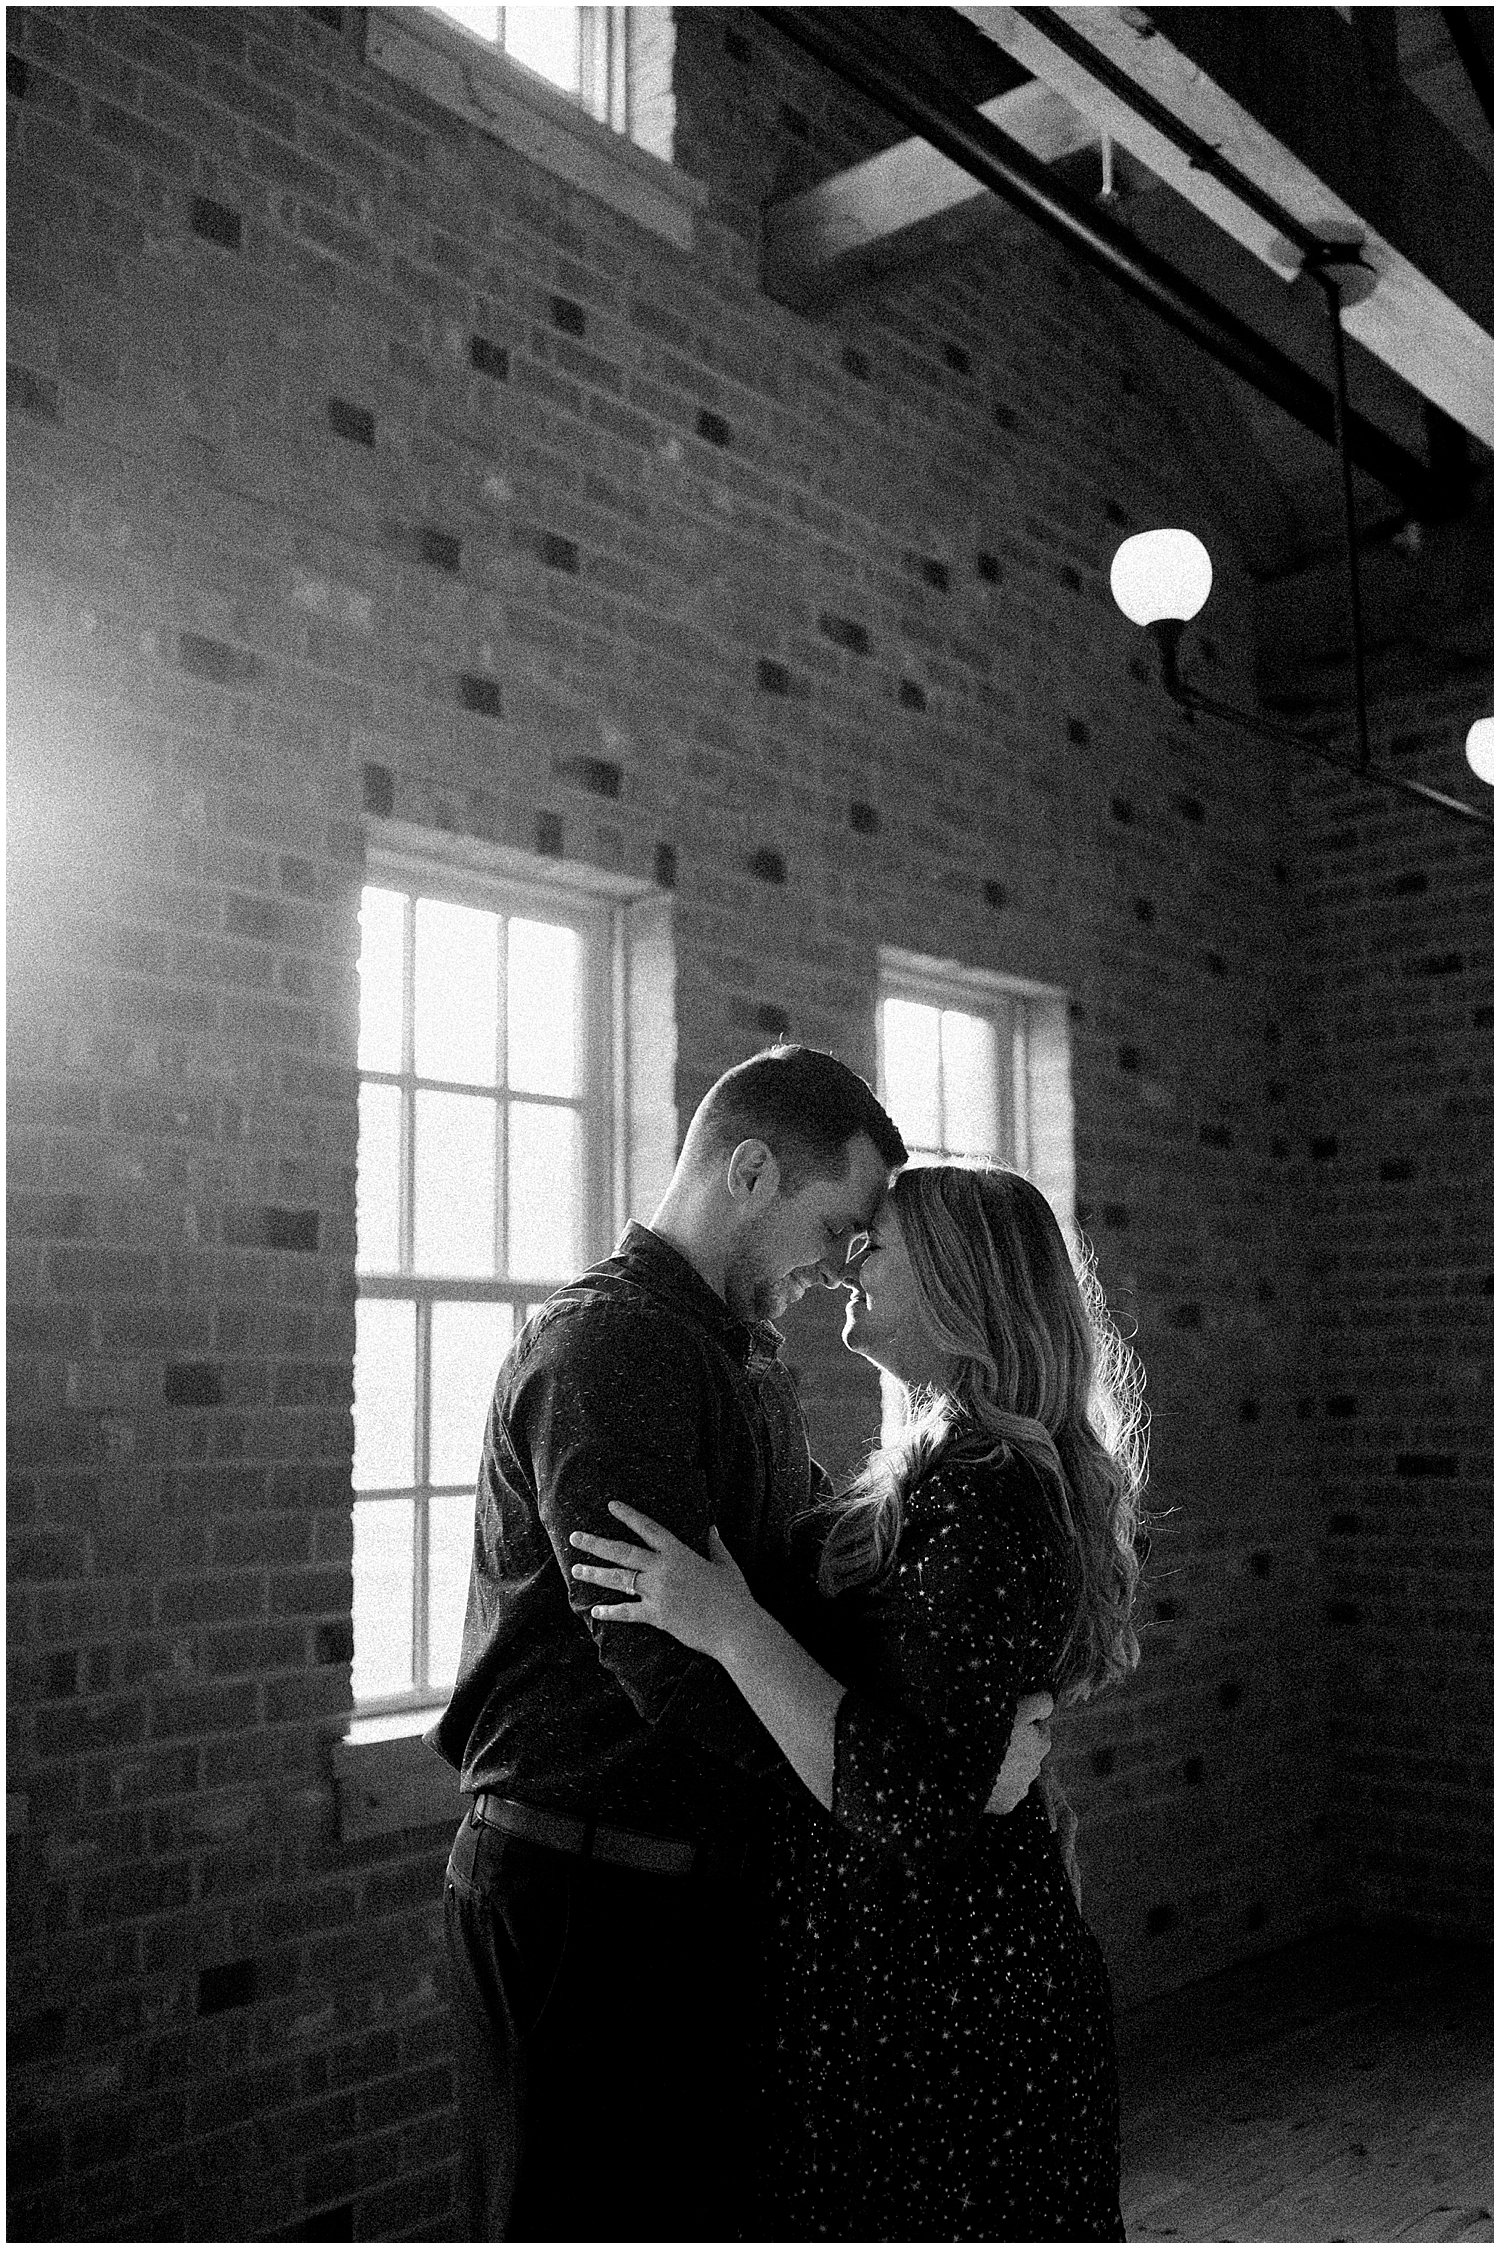 Carillon Brewery Engagement Portrait Session | Kettering, Ohio